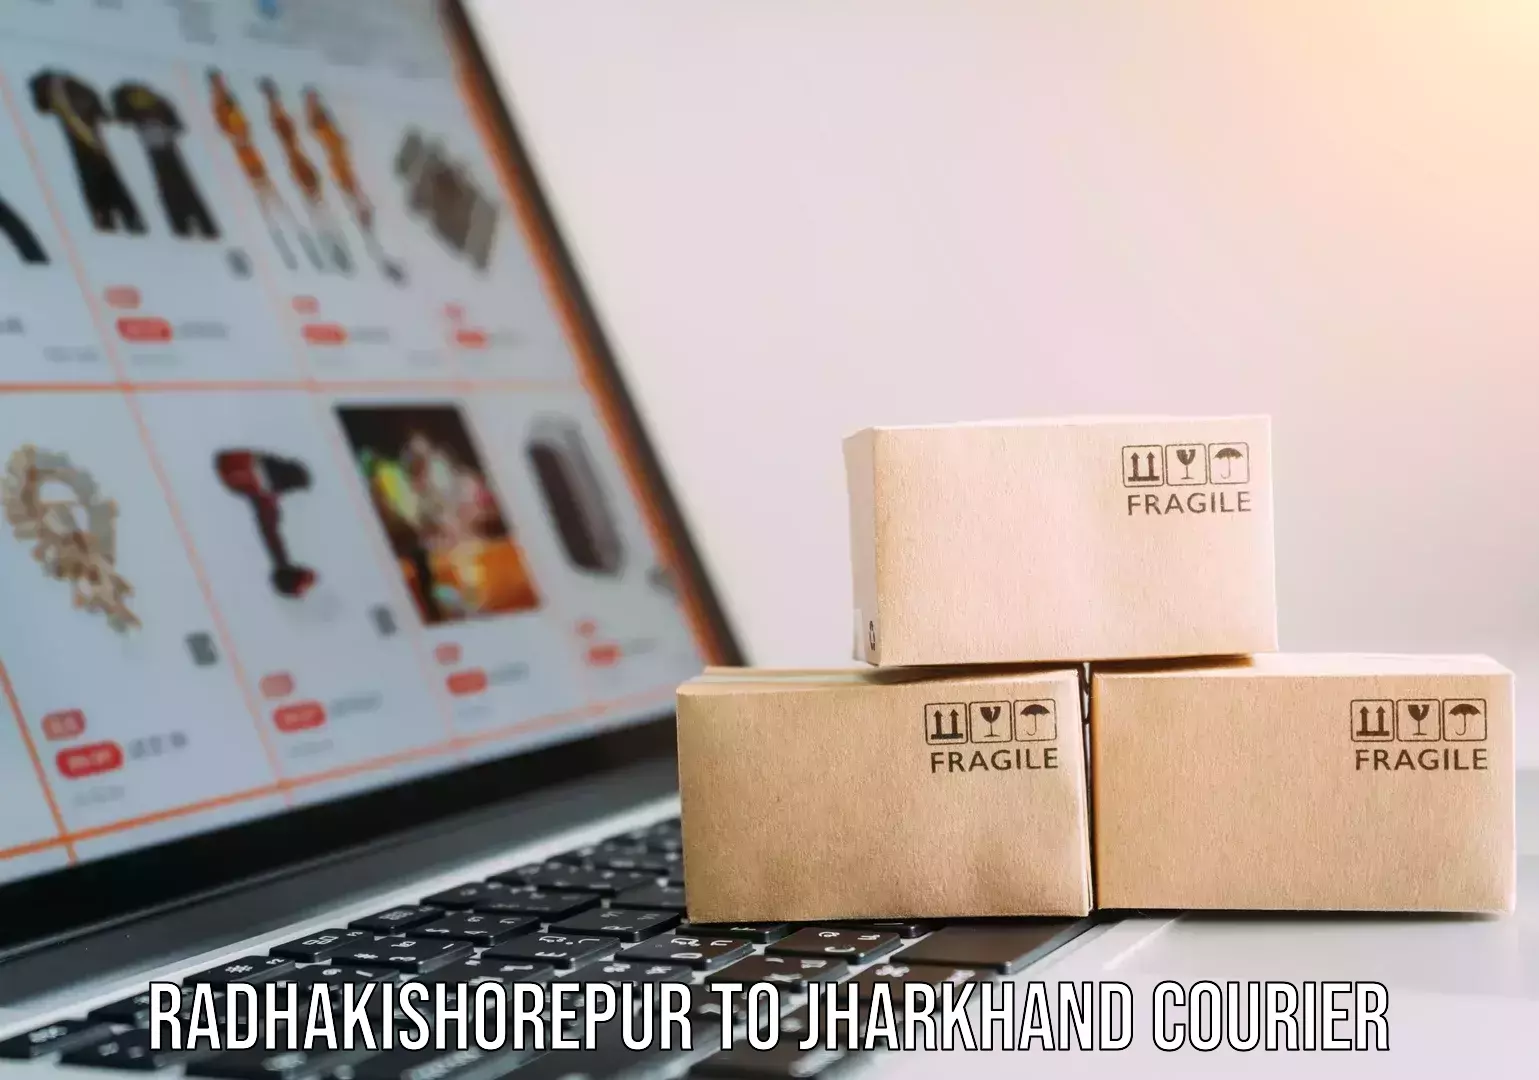 Parcel service for businesses Radhakishorepur to Jharkhand